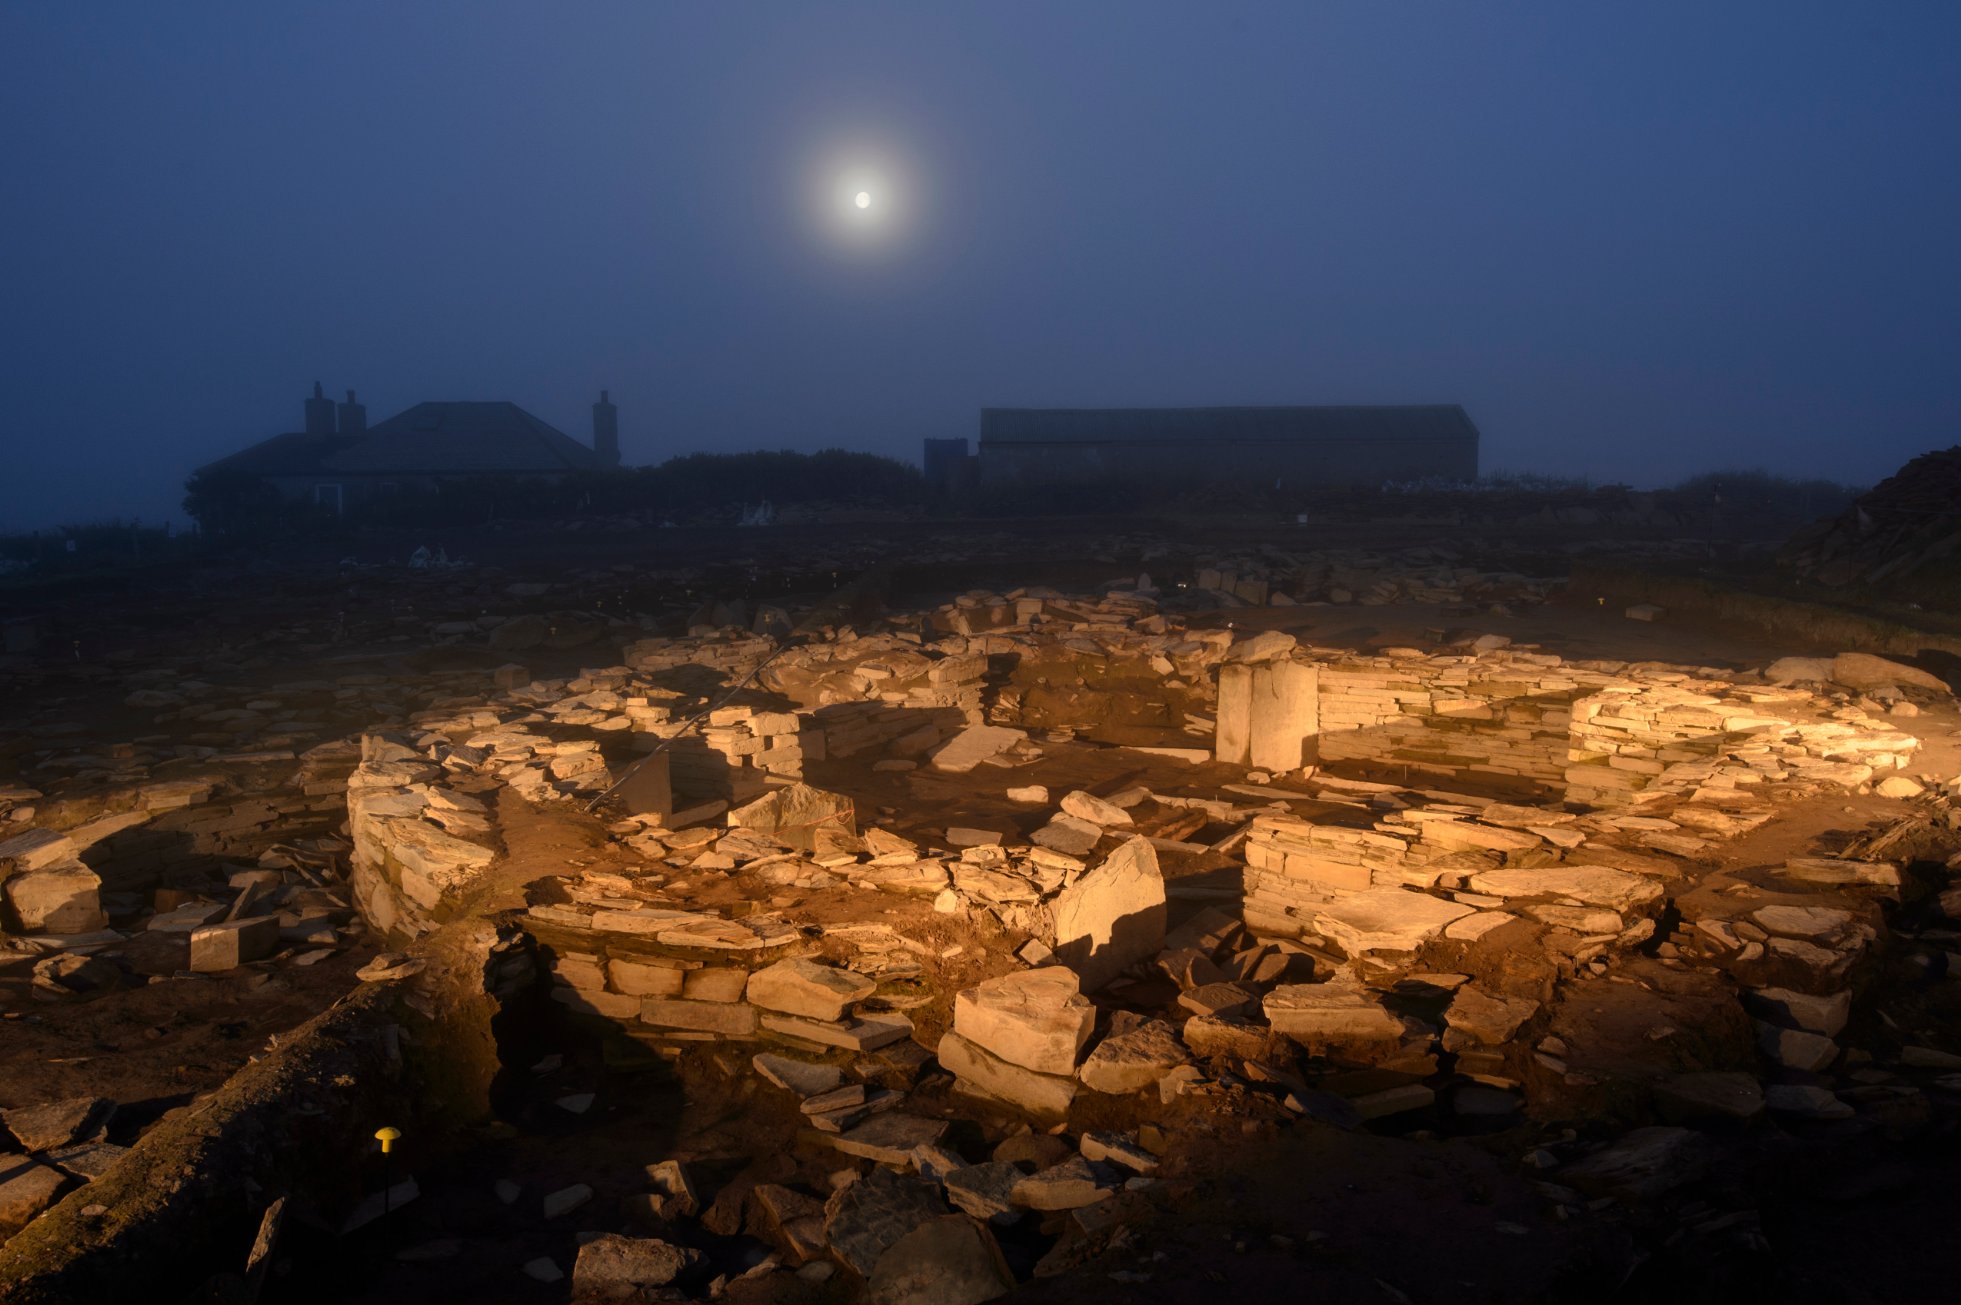 Dig deeper into Orkney's history